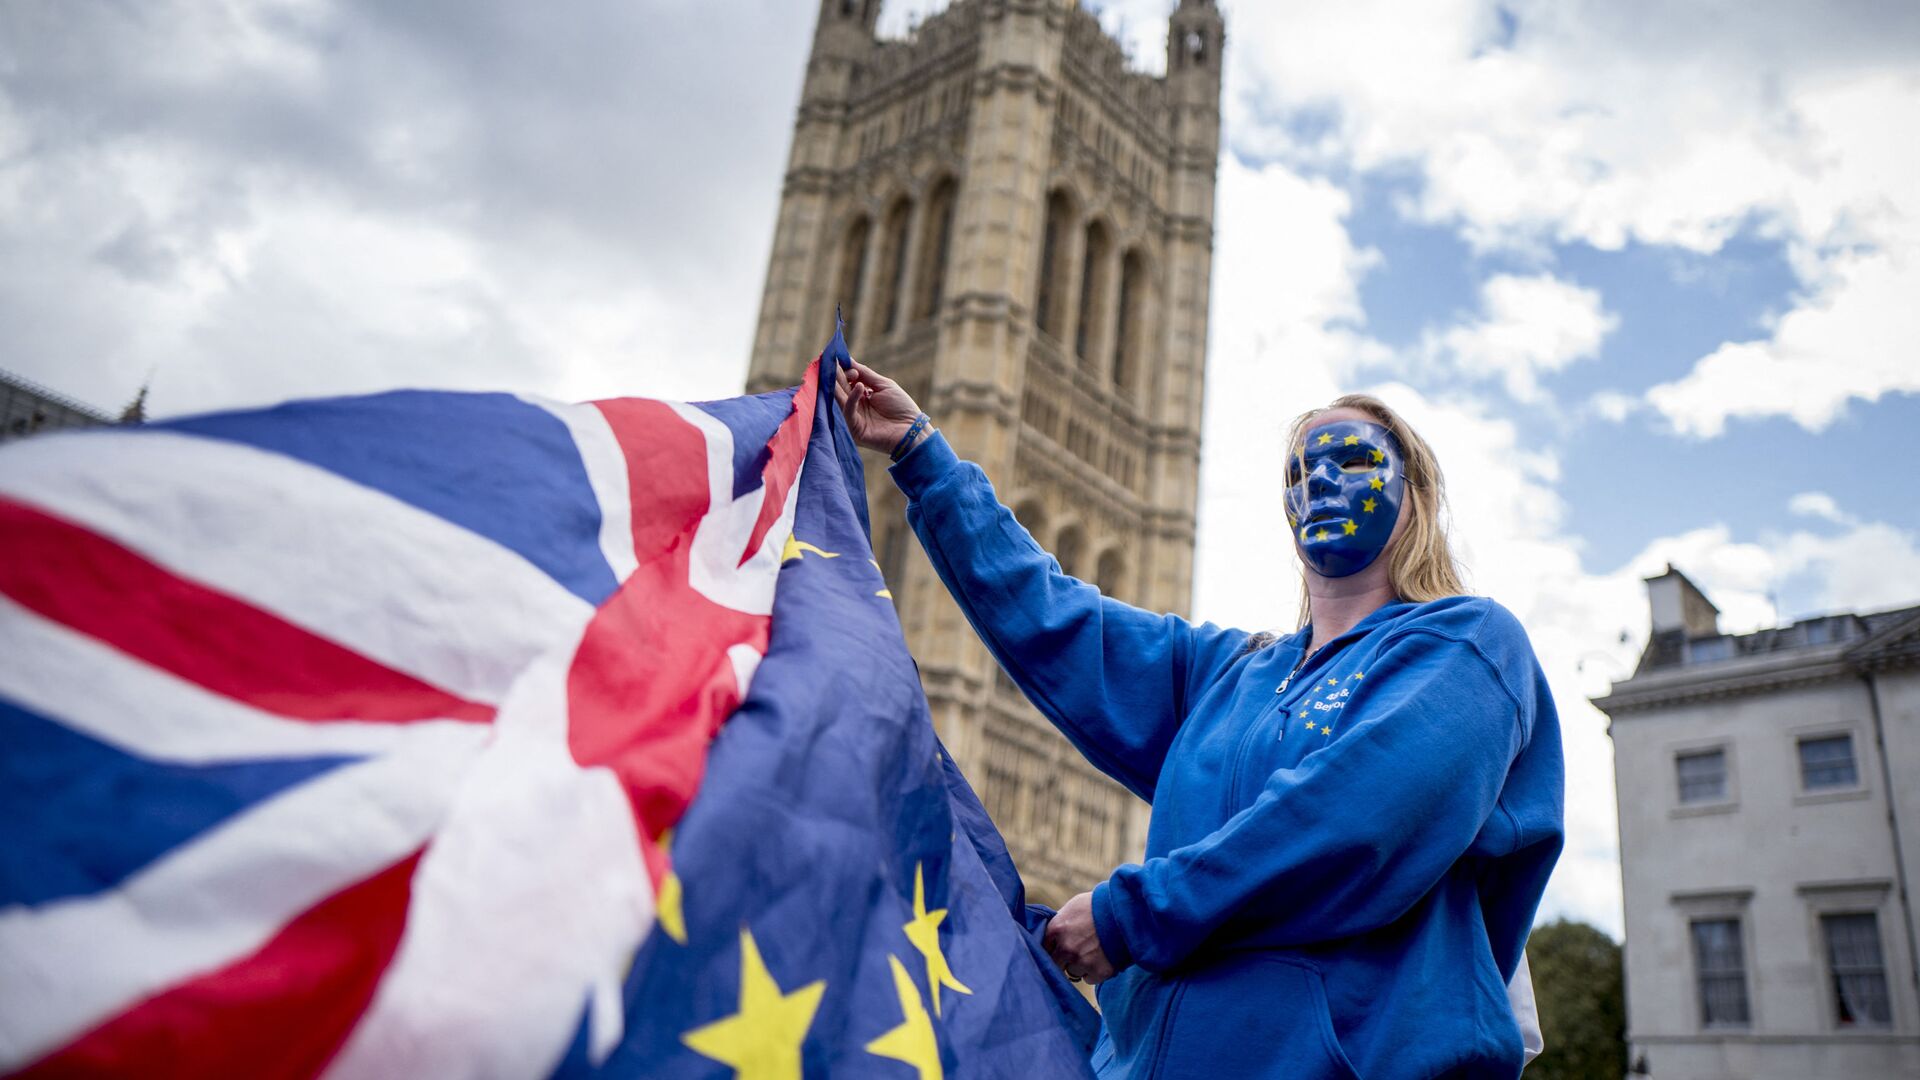 A Pro-European Union protester holds Union and European flags in front of the Victoria Tower at The Palace of Westminster in central London on September 13, 2017, ahead of a rally to warn about the terms of Brexit, by EU nationals in Britain and UK nationals in Europe - Sputnik International, 1920, 10.11.2021